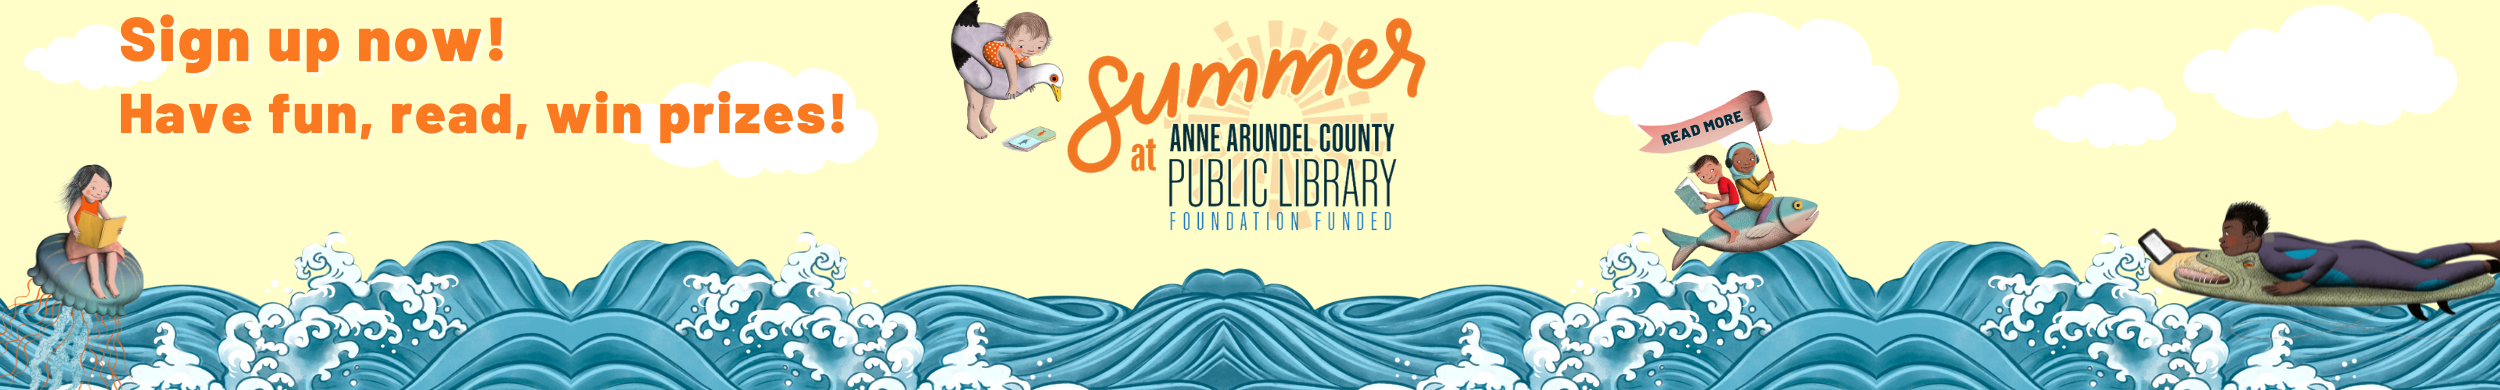 Summer @ Your Library Sign Up and Events